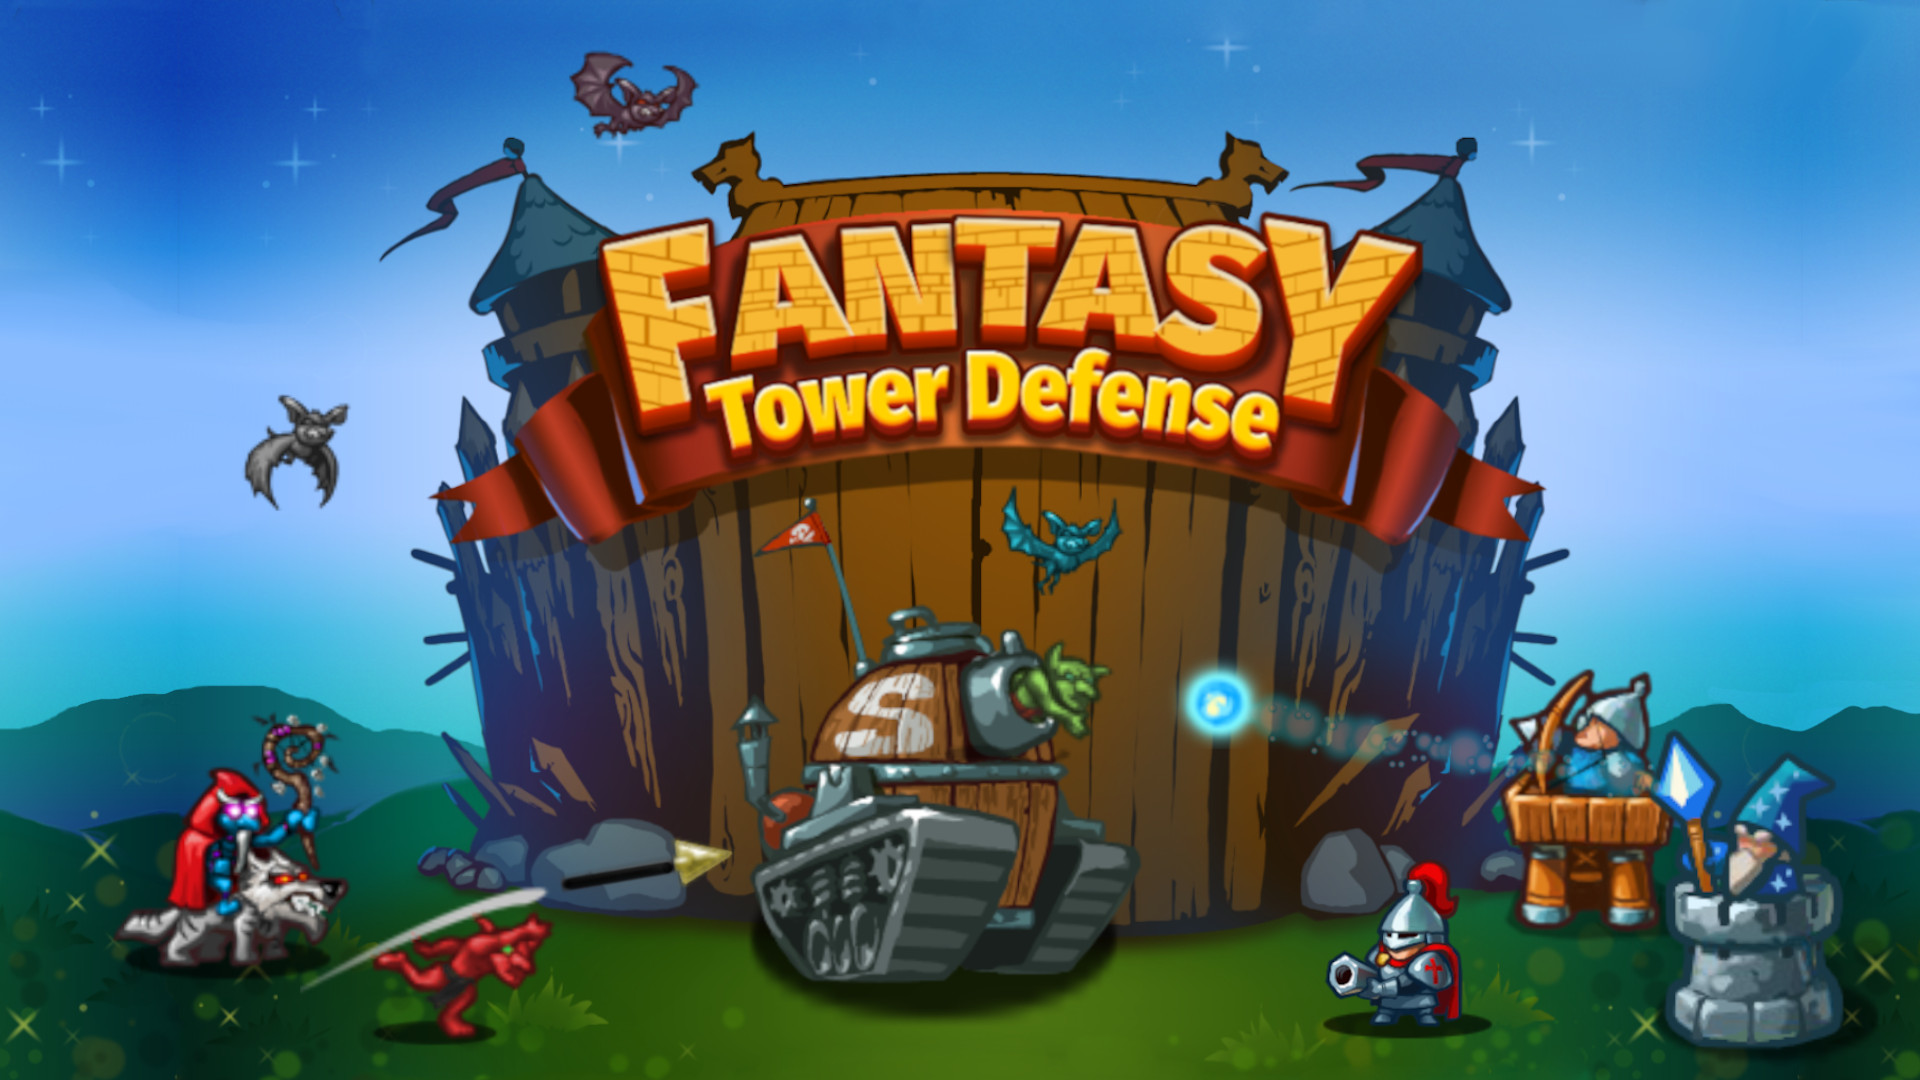 Total Defence Tower Defence Game lets you defend Singapore against threats